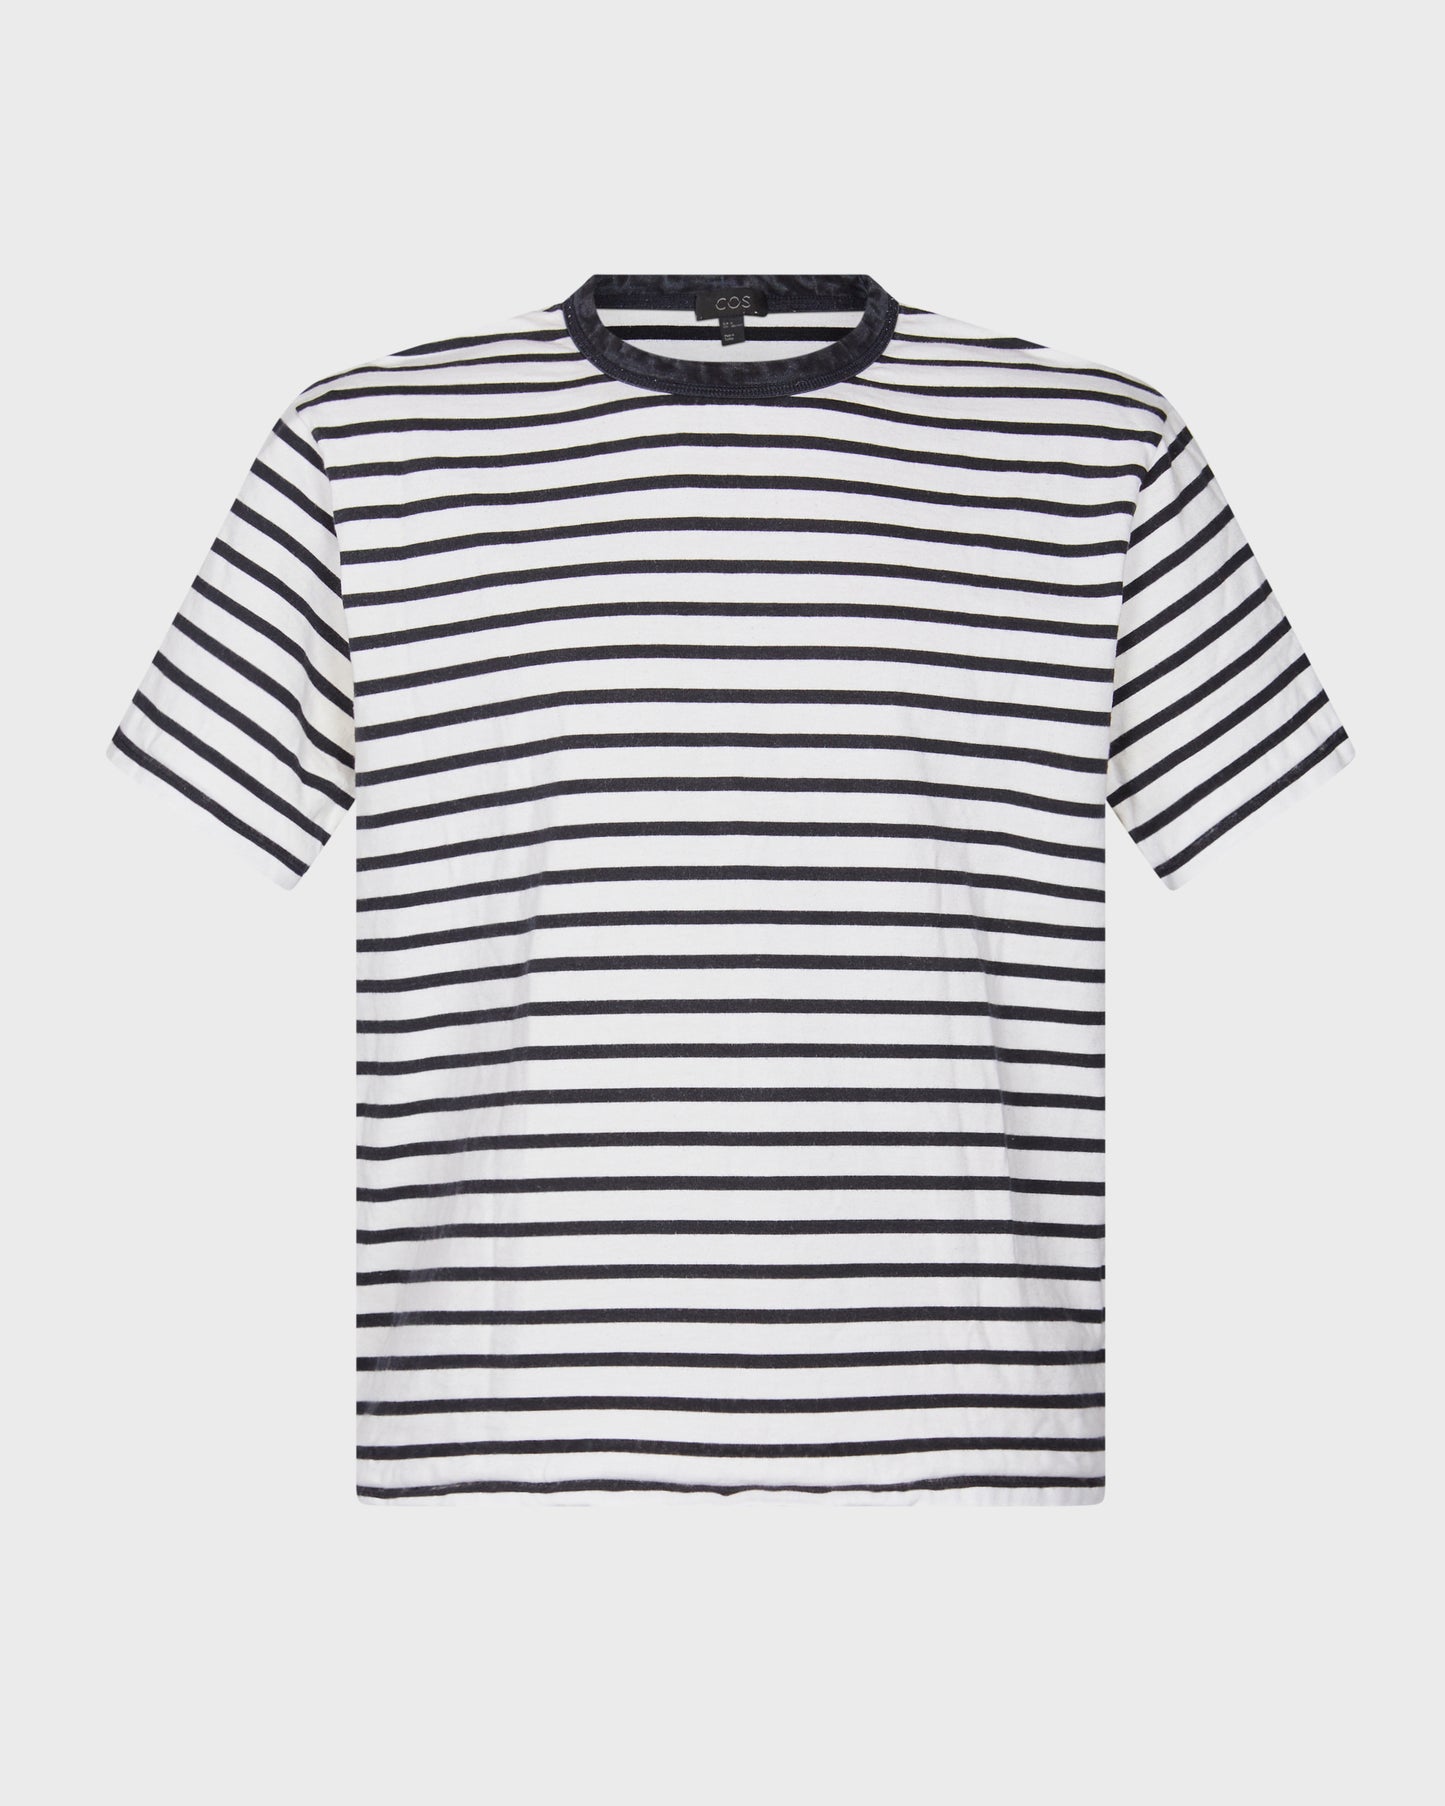 Cos Thick Cotton Crew Neck Striped Tee